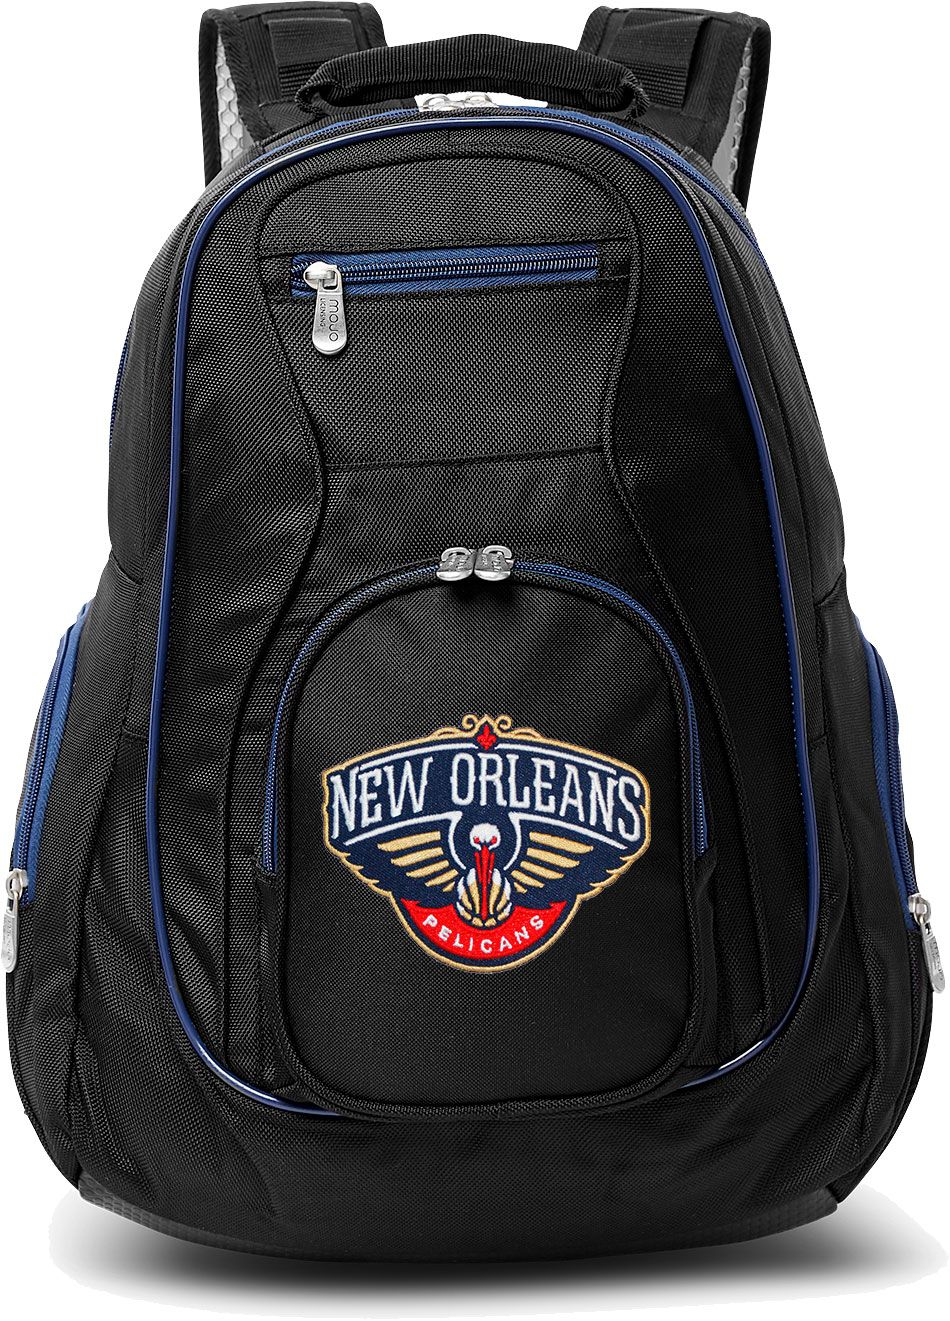 Mojo New Orleans Pelicans Colored Trim Laptop Backpack, Men's